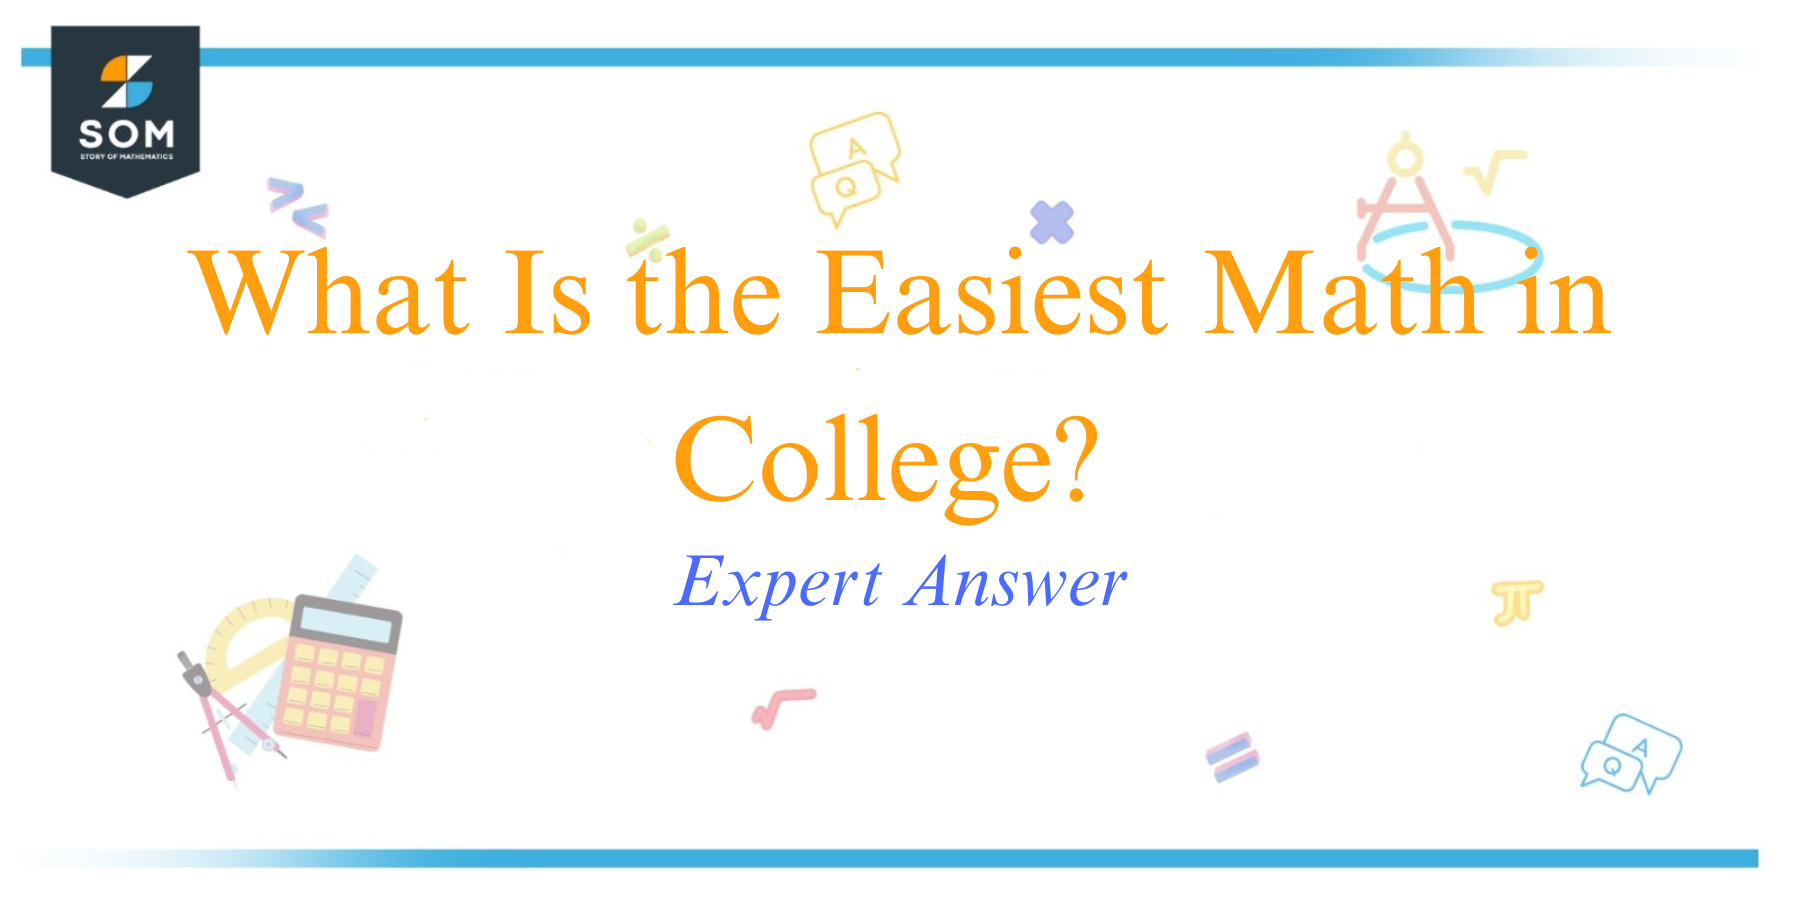 What Is the Easiest Math in College Expert Answer